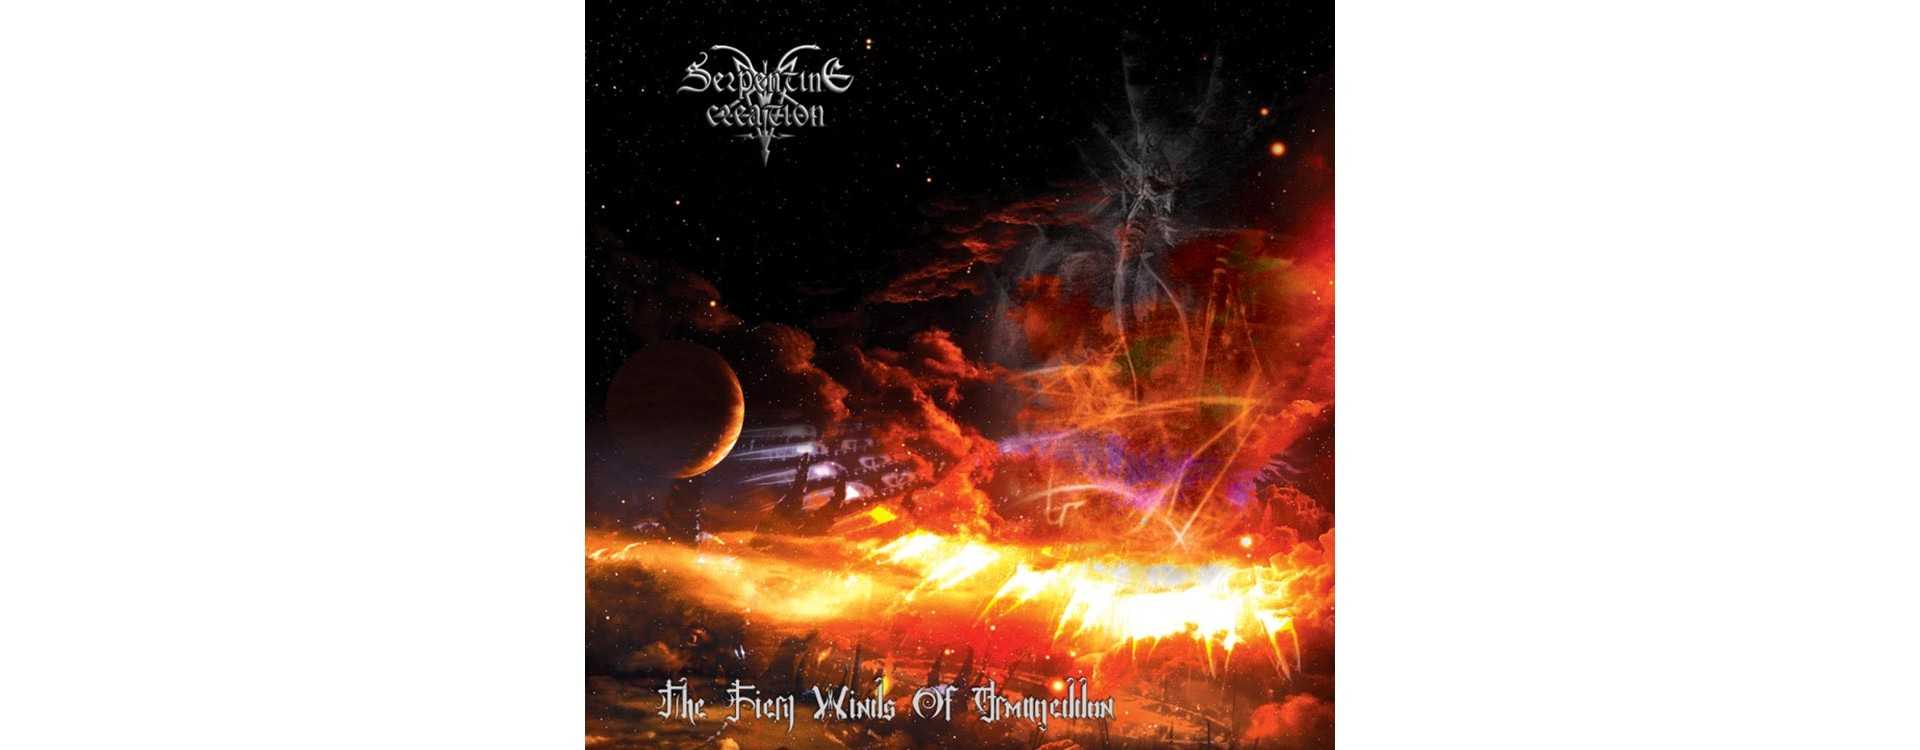 SERPENTINE CREATION - The Fiery Winds of Armageddon . CD